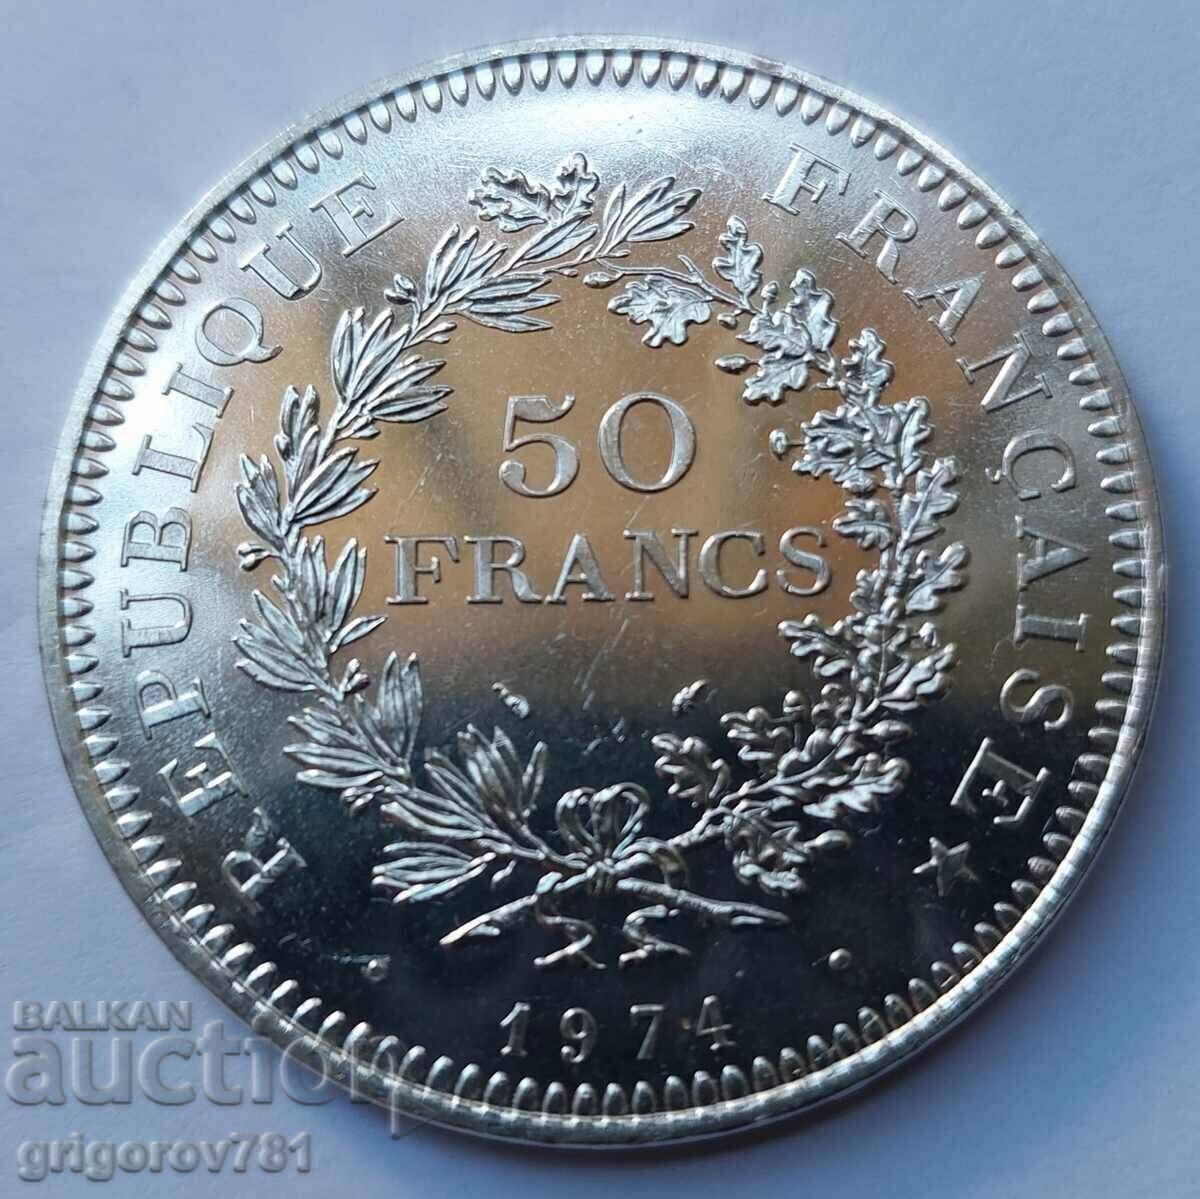 50 Francs Silver France 1974 - Silver Coin #17